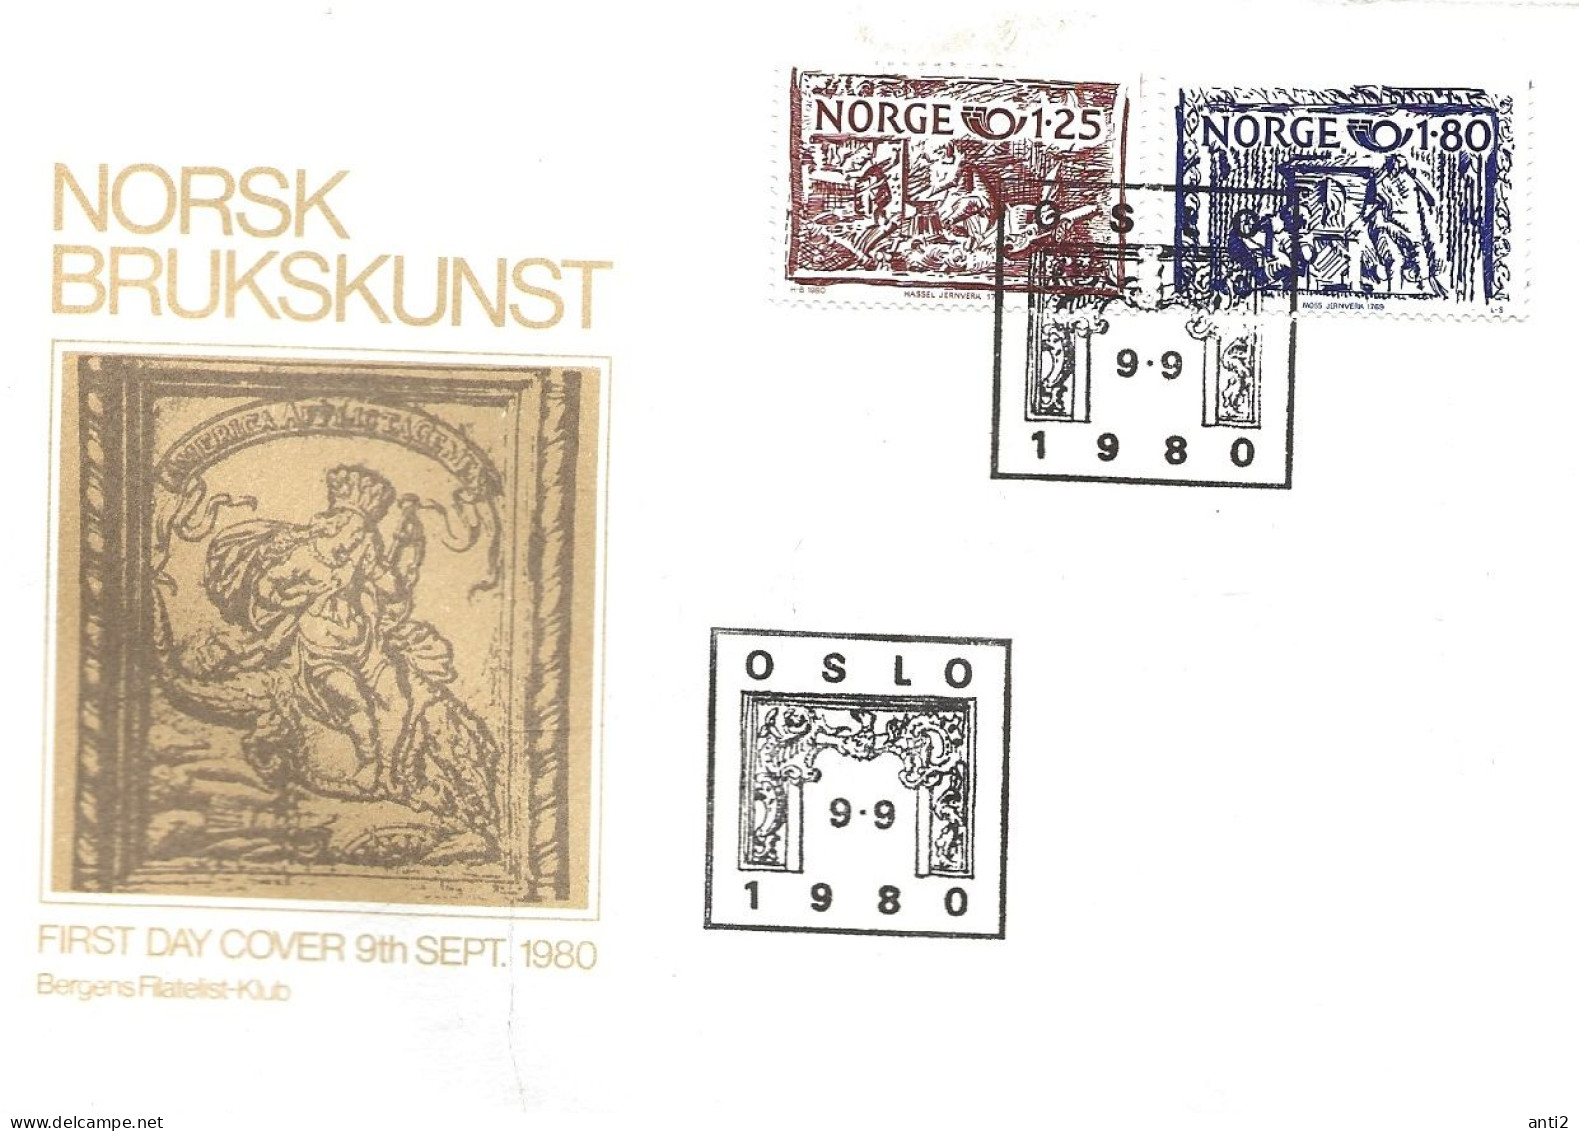 Norge Norway 1980 NORDEN: Craftsmanships Mi 821-822, FDC - Covers & Documents